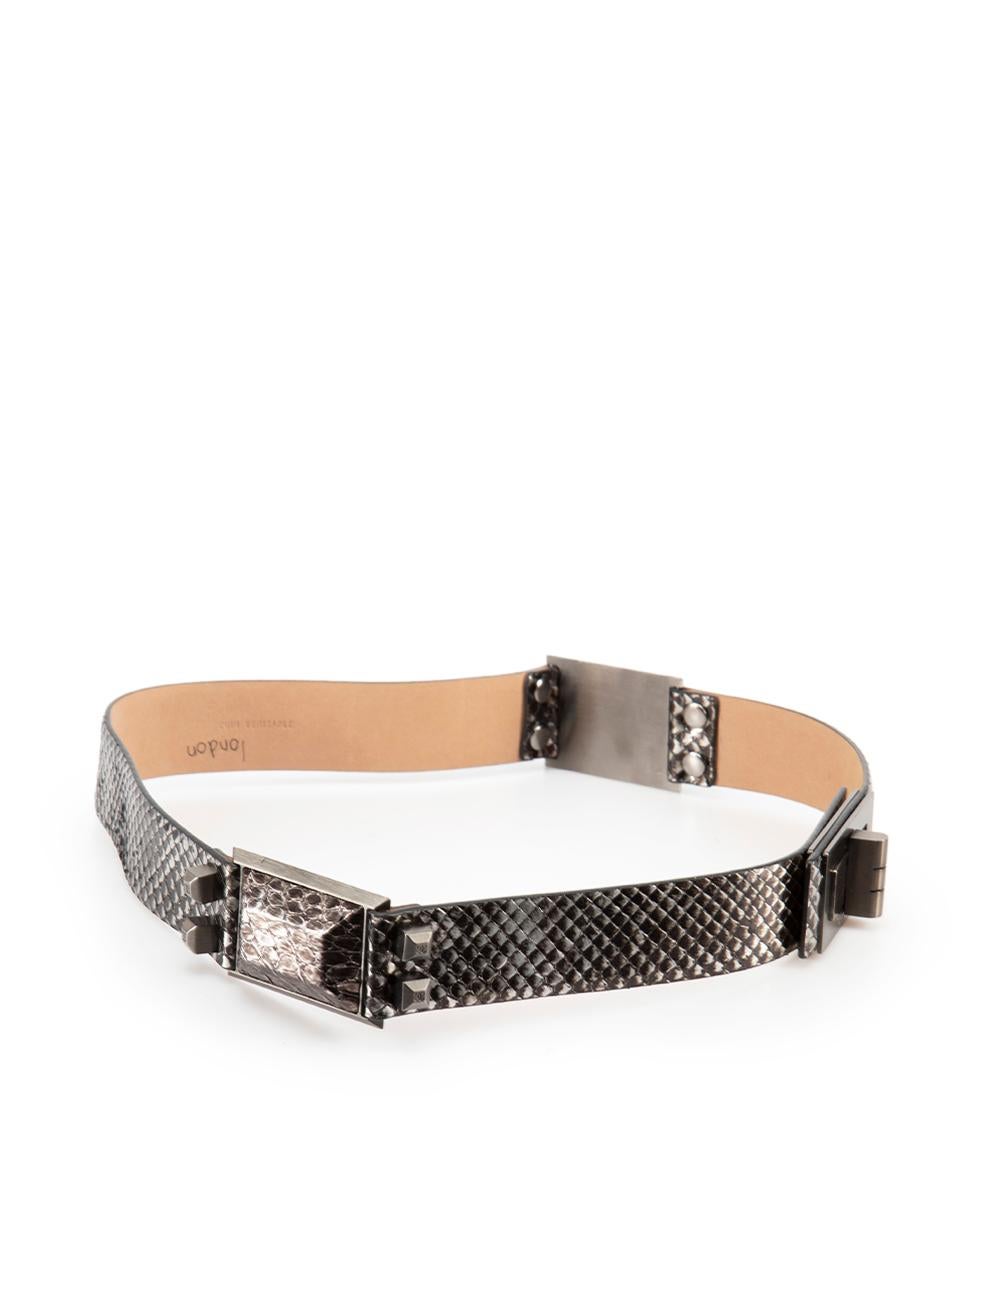 CONDITION is Very good. Minimal wear to belt is evident. Minimal wear to the lining with pen writing on this used Chanel designer resale item. Please note this belt is not adjustable.



Details


Anthracite

Snakeskin leather

Belt

Metallic